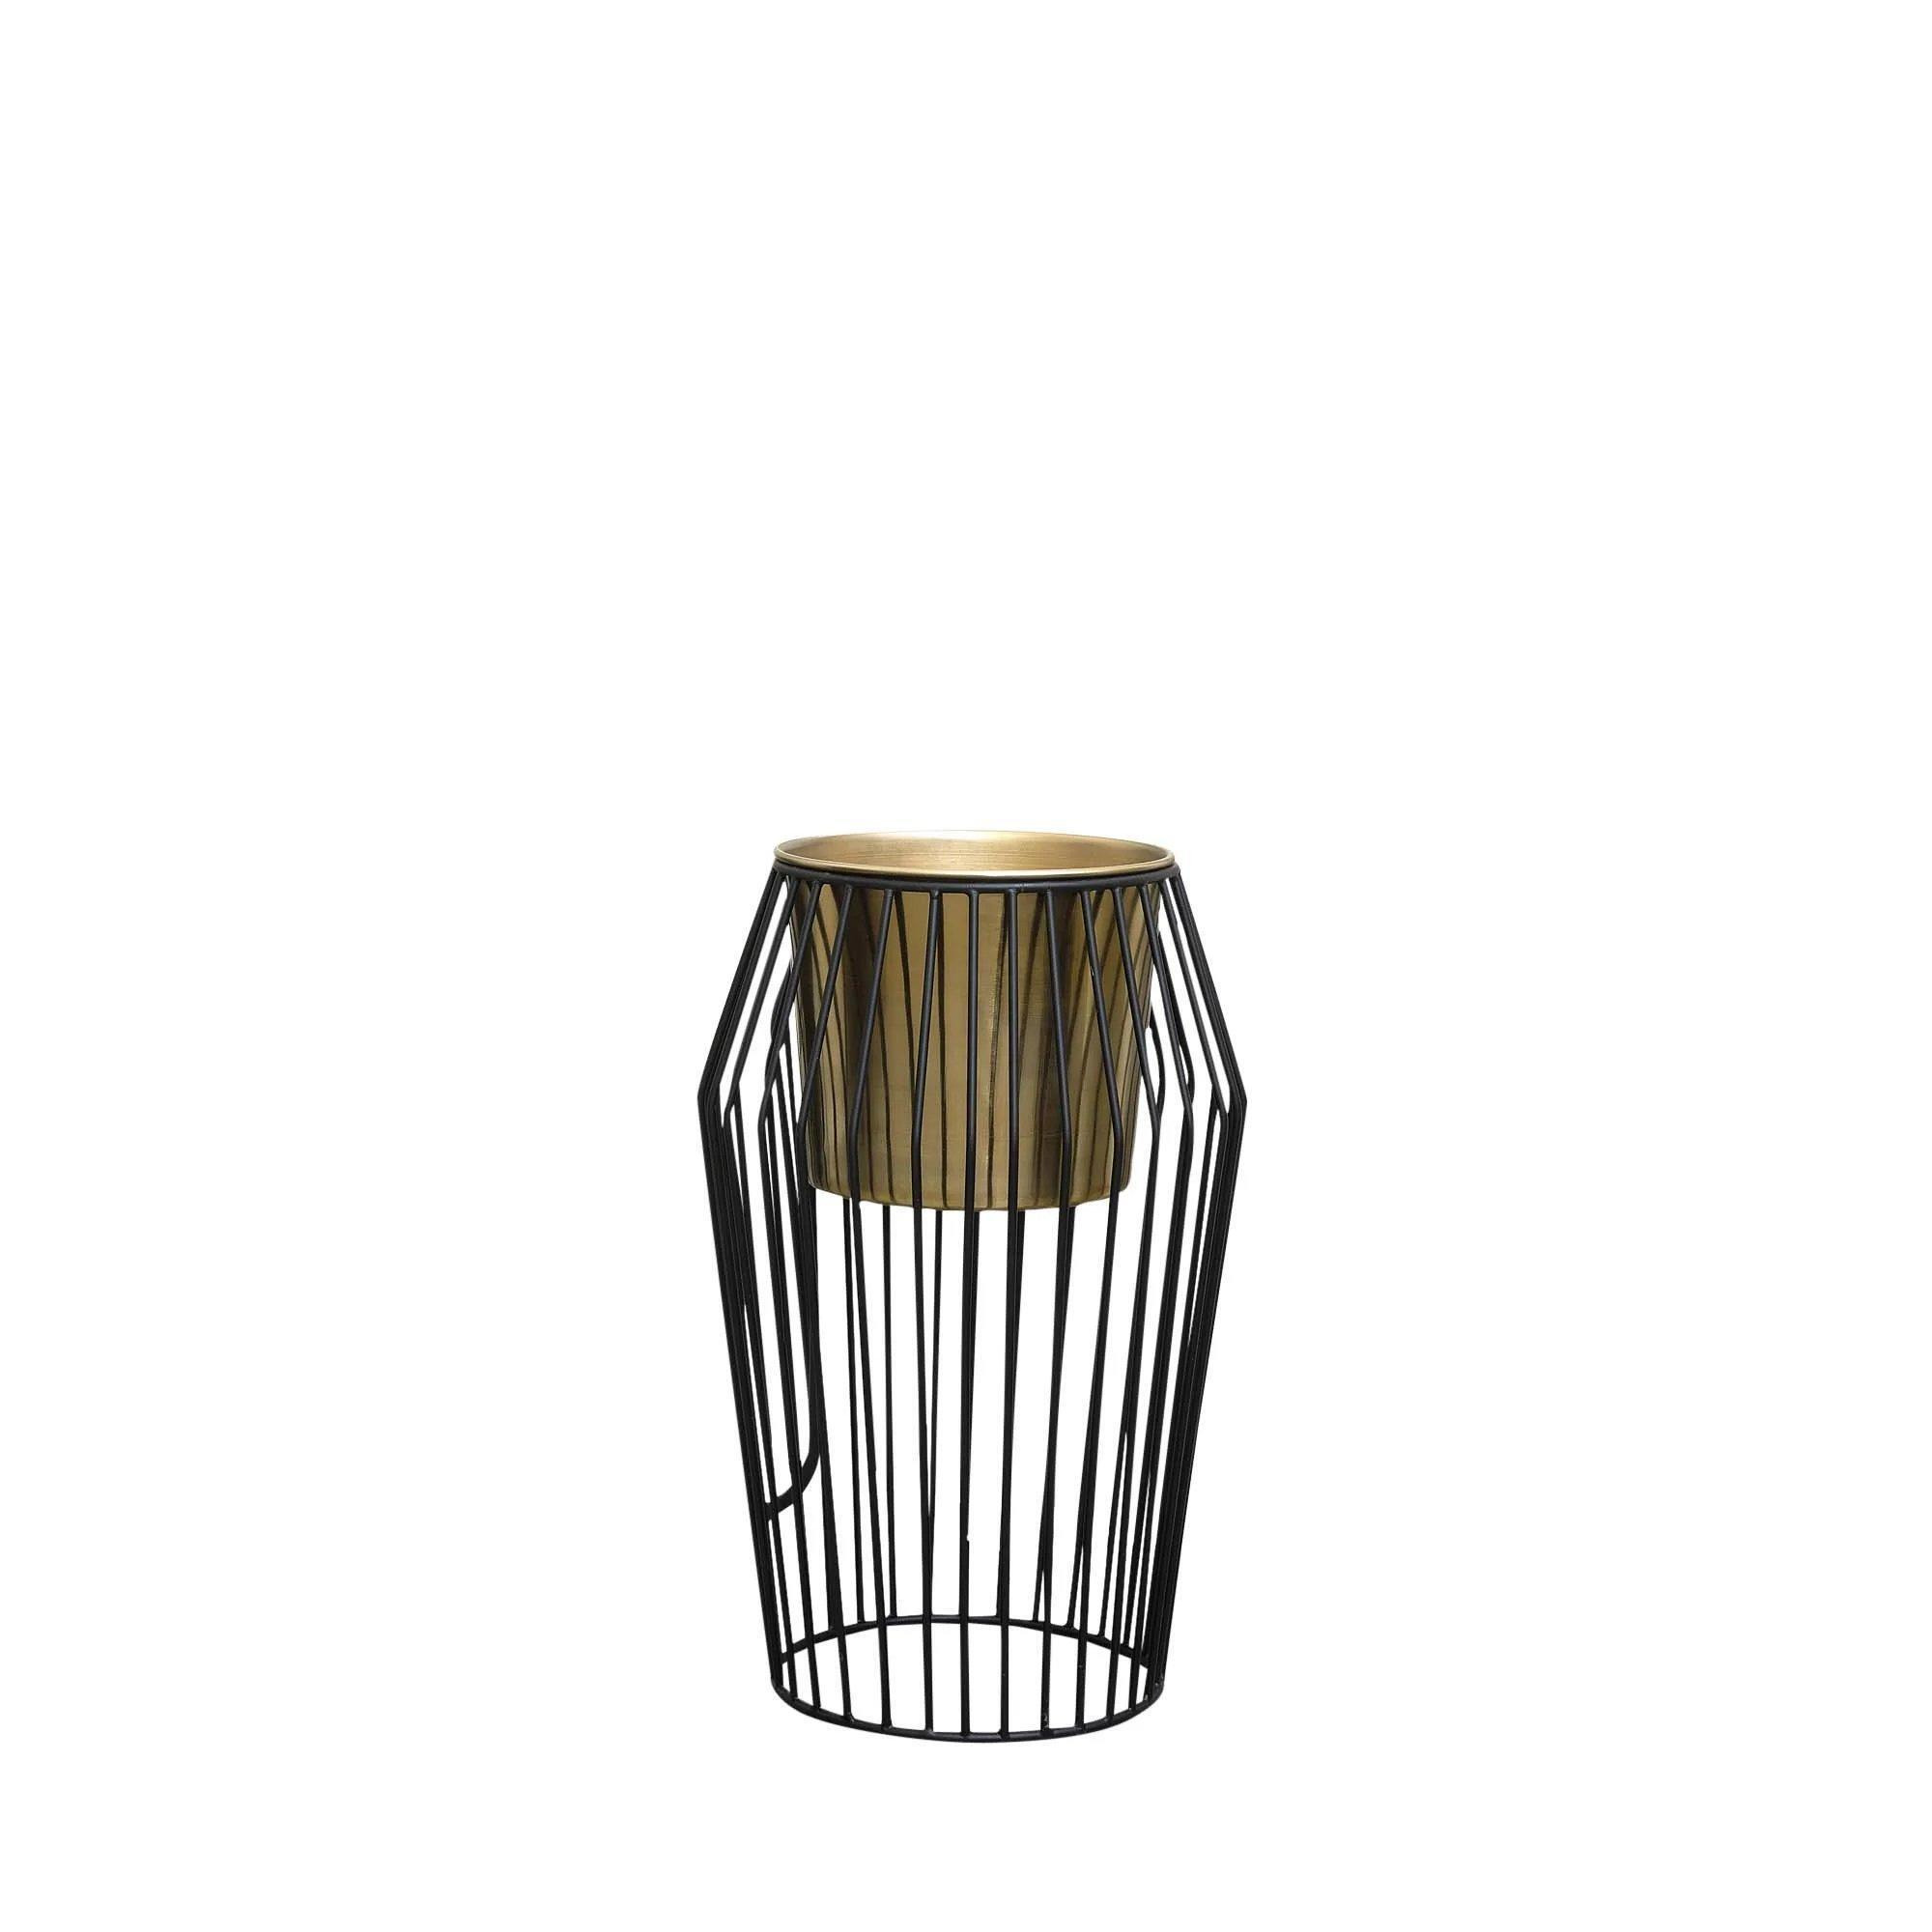 Tall Black & Gold Wire Planter Pot Stand - 45cm - image 1